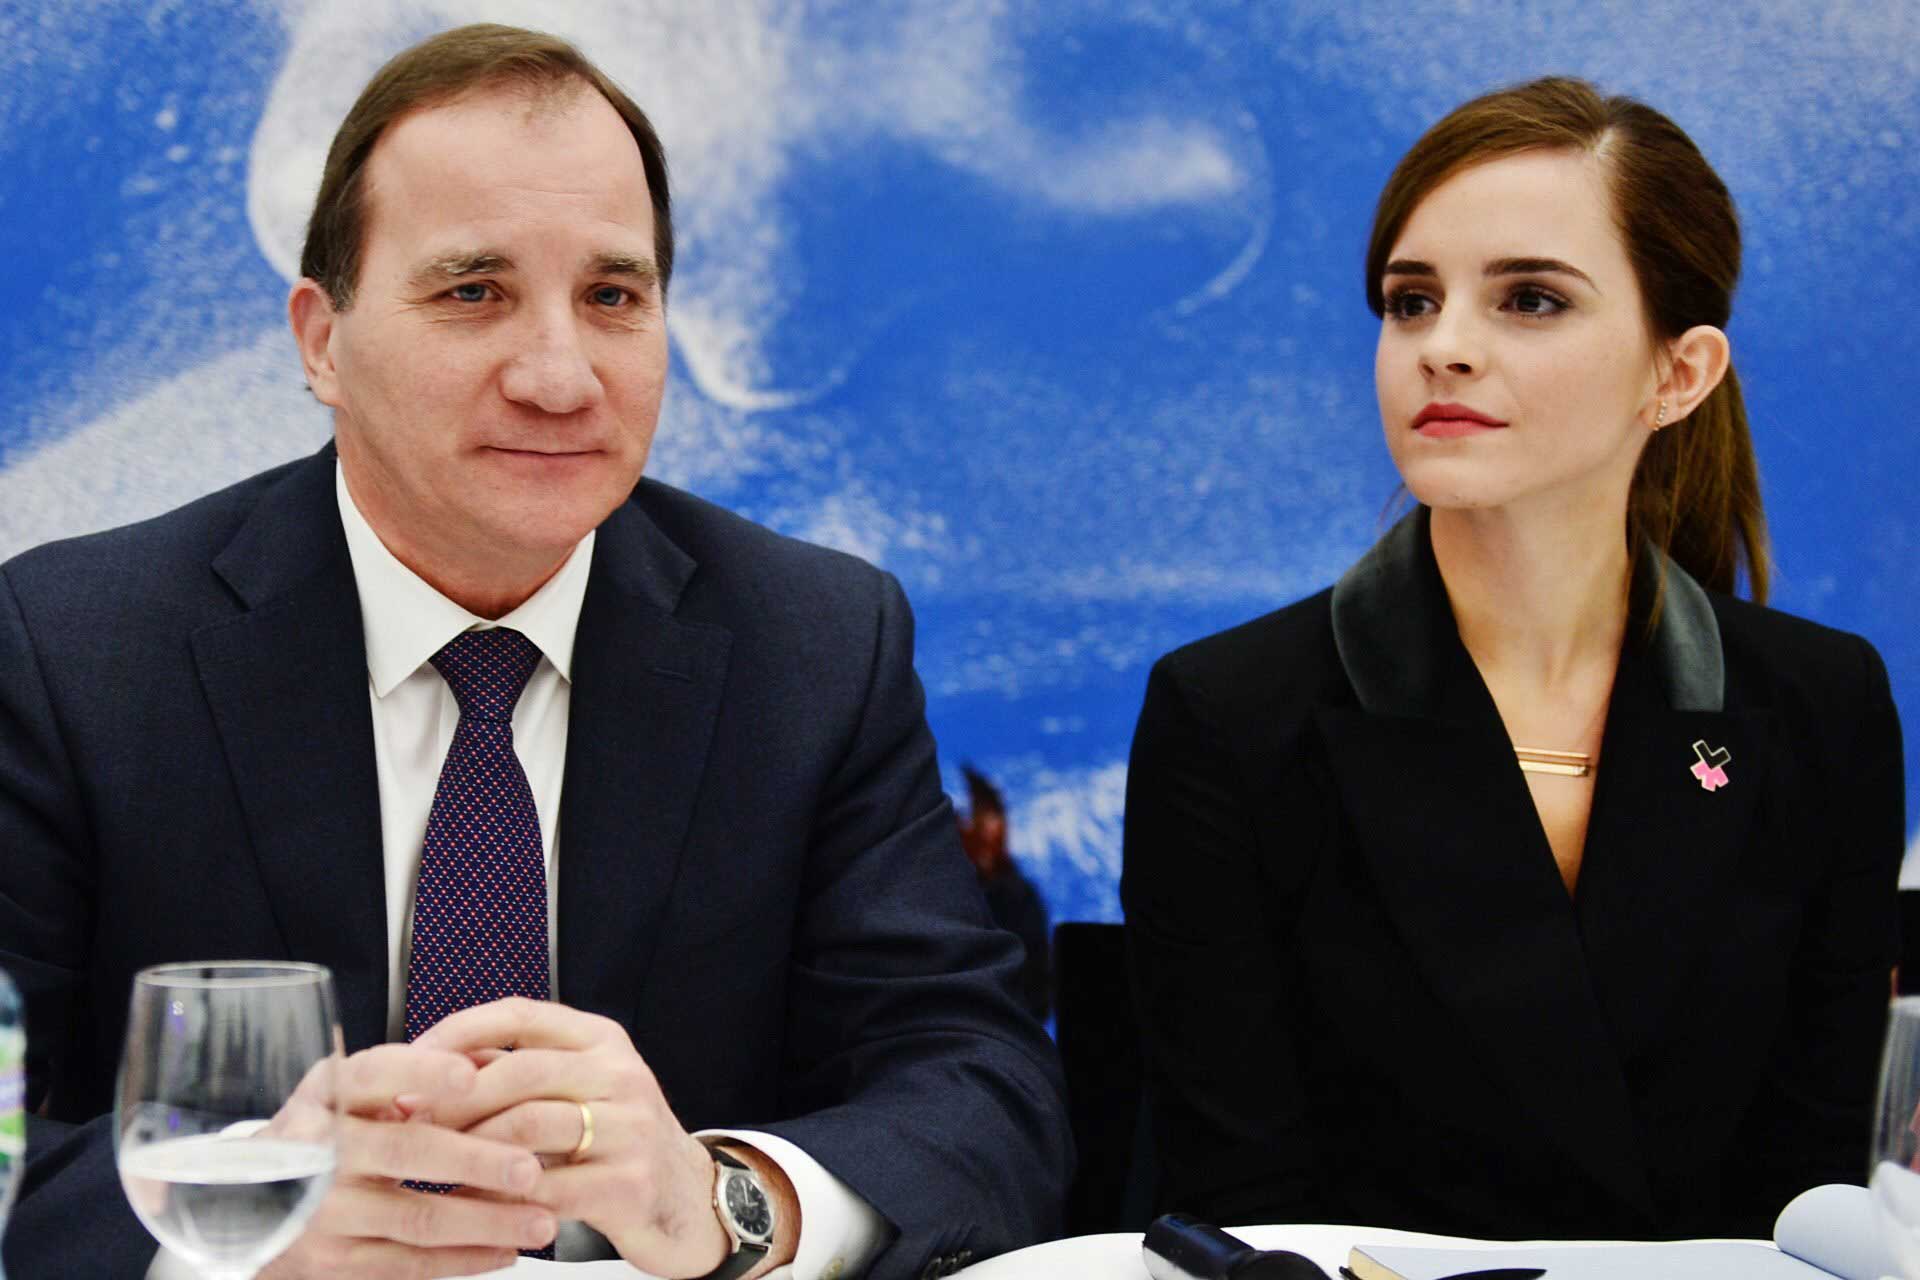 Swedish prime minister Stefan Löfven and actress Emma Watson attend the World Economic Forum Annual Meeting 2015 in Davos, Switzerland. (Aftonbladet/IBL/Zuma)